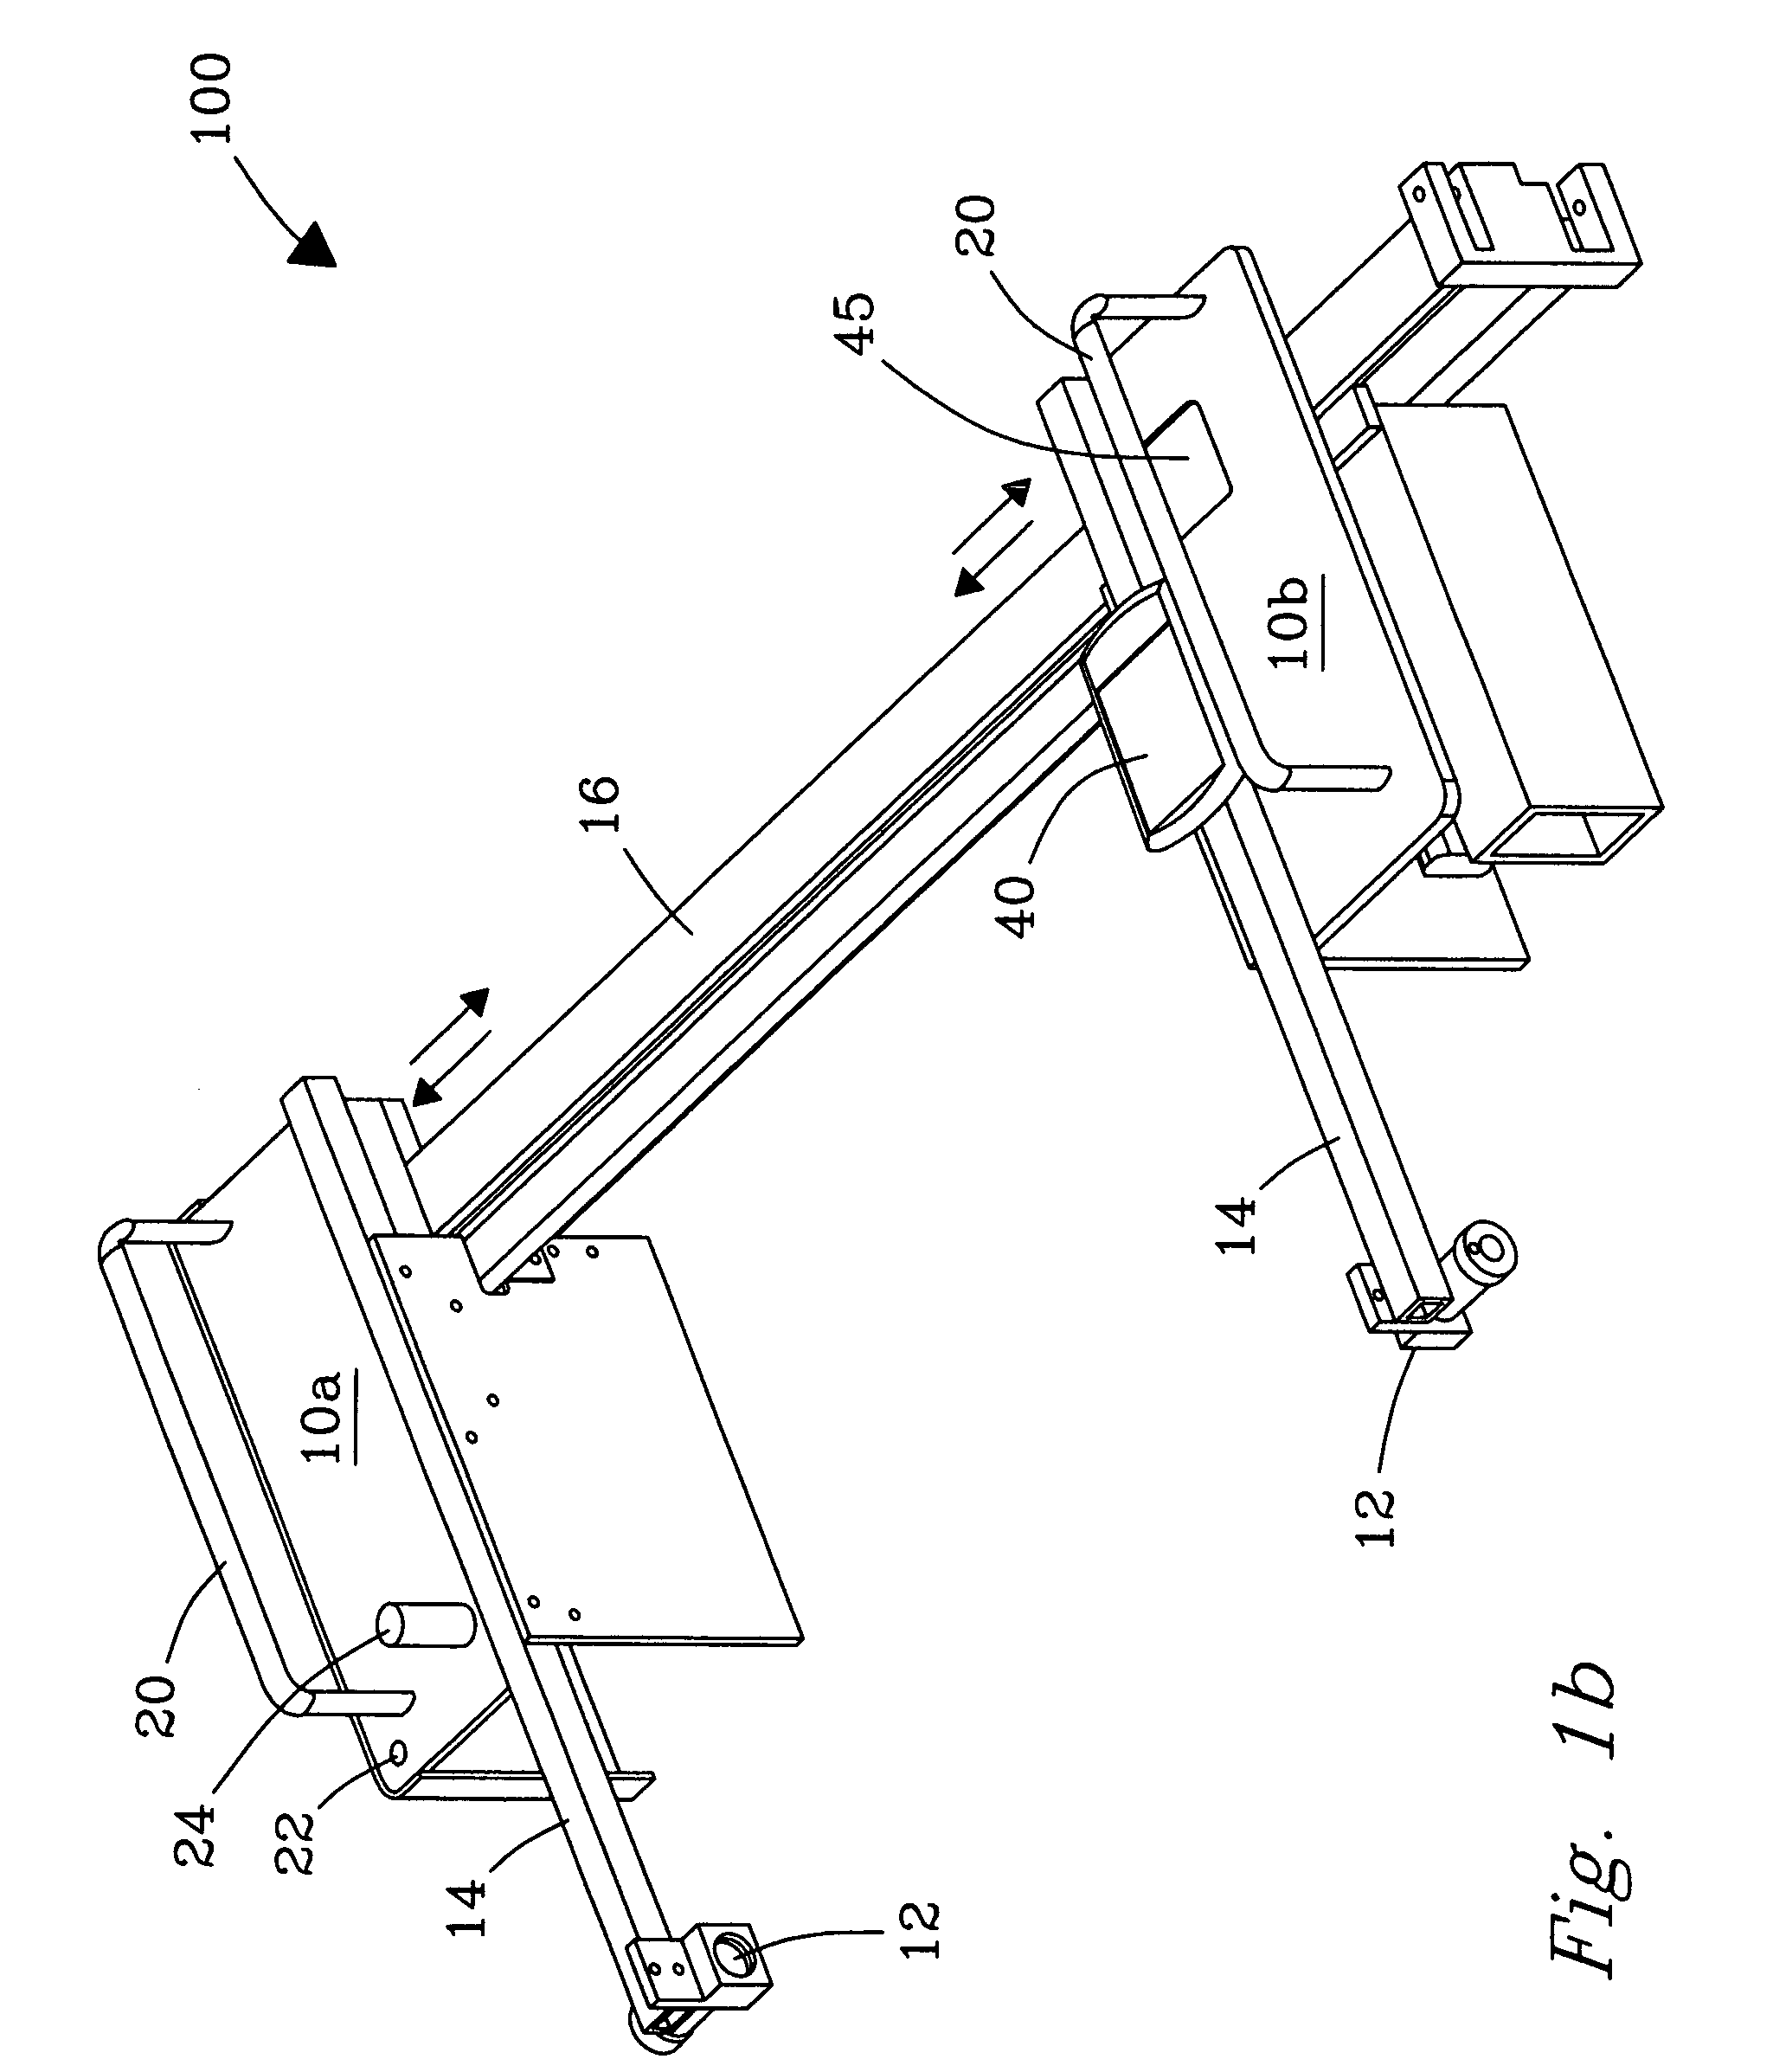 Methods and apparatus for multi-parameter acoustic signature inspection